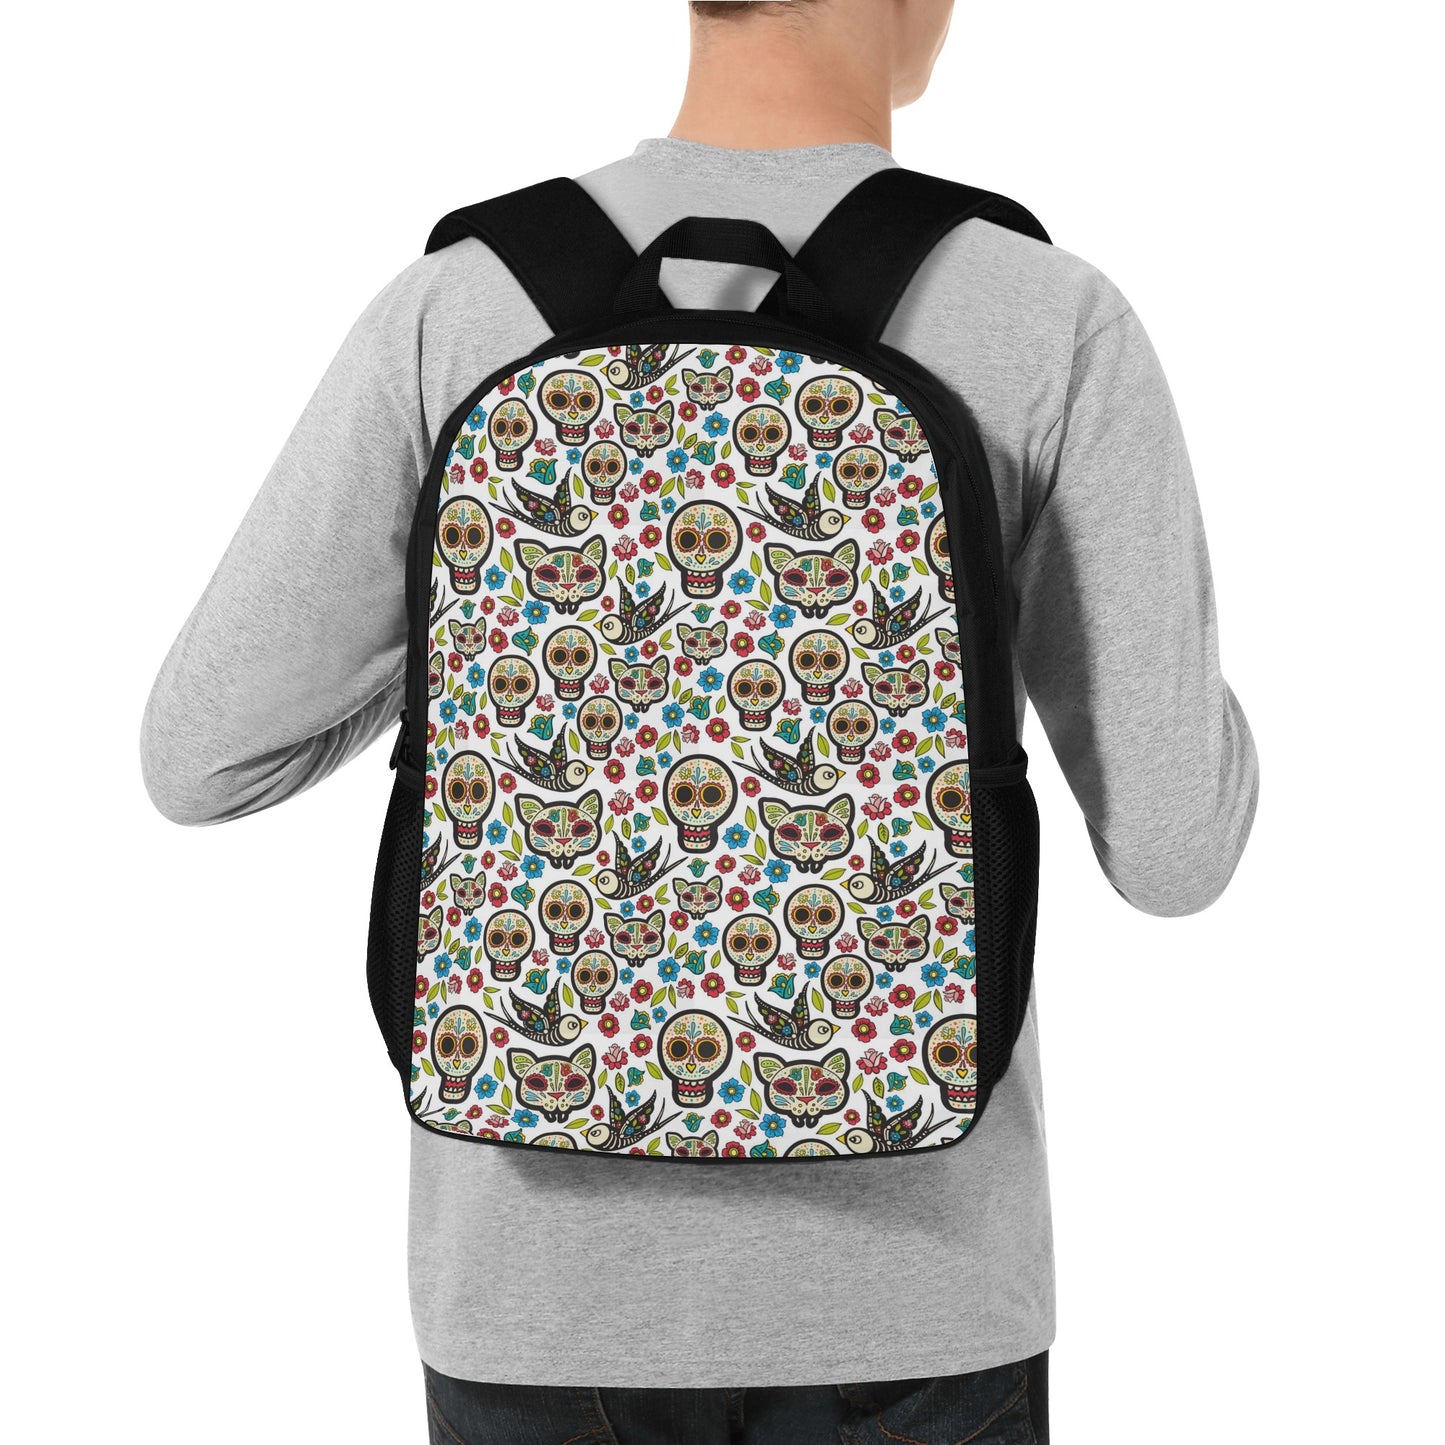 Day of the dead sugar skull parttern 17 Inch Laptop Backpack